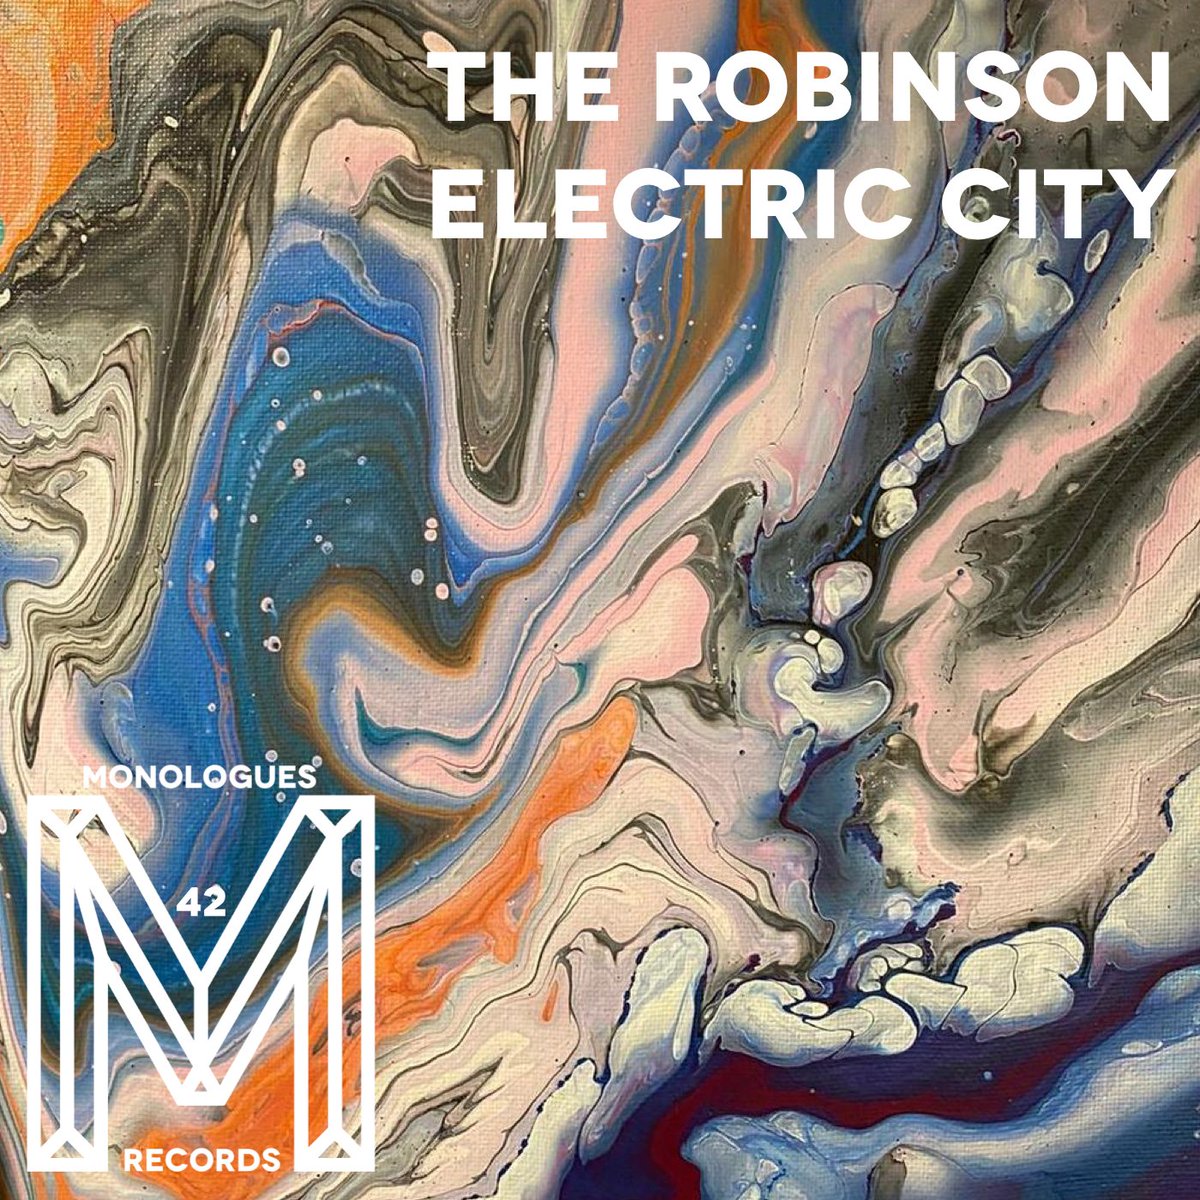 Next up on Monologues, a superb deep house EP in the Detroit/Chicago vein from Milan's The Robinson — latterly of Futureboogie where they received a remix from the legendary Ron Trent. Listen + pre-order here
soundcloud.com/monologues/the…